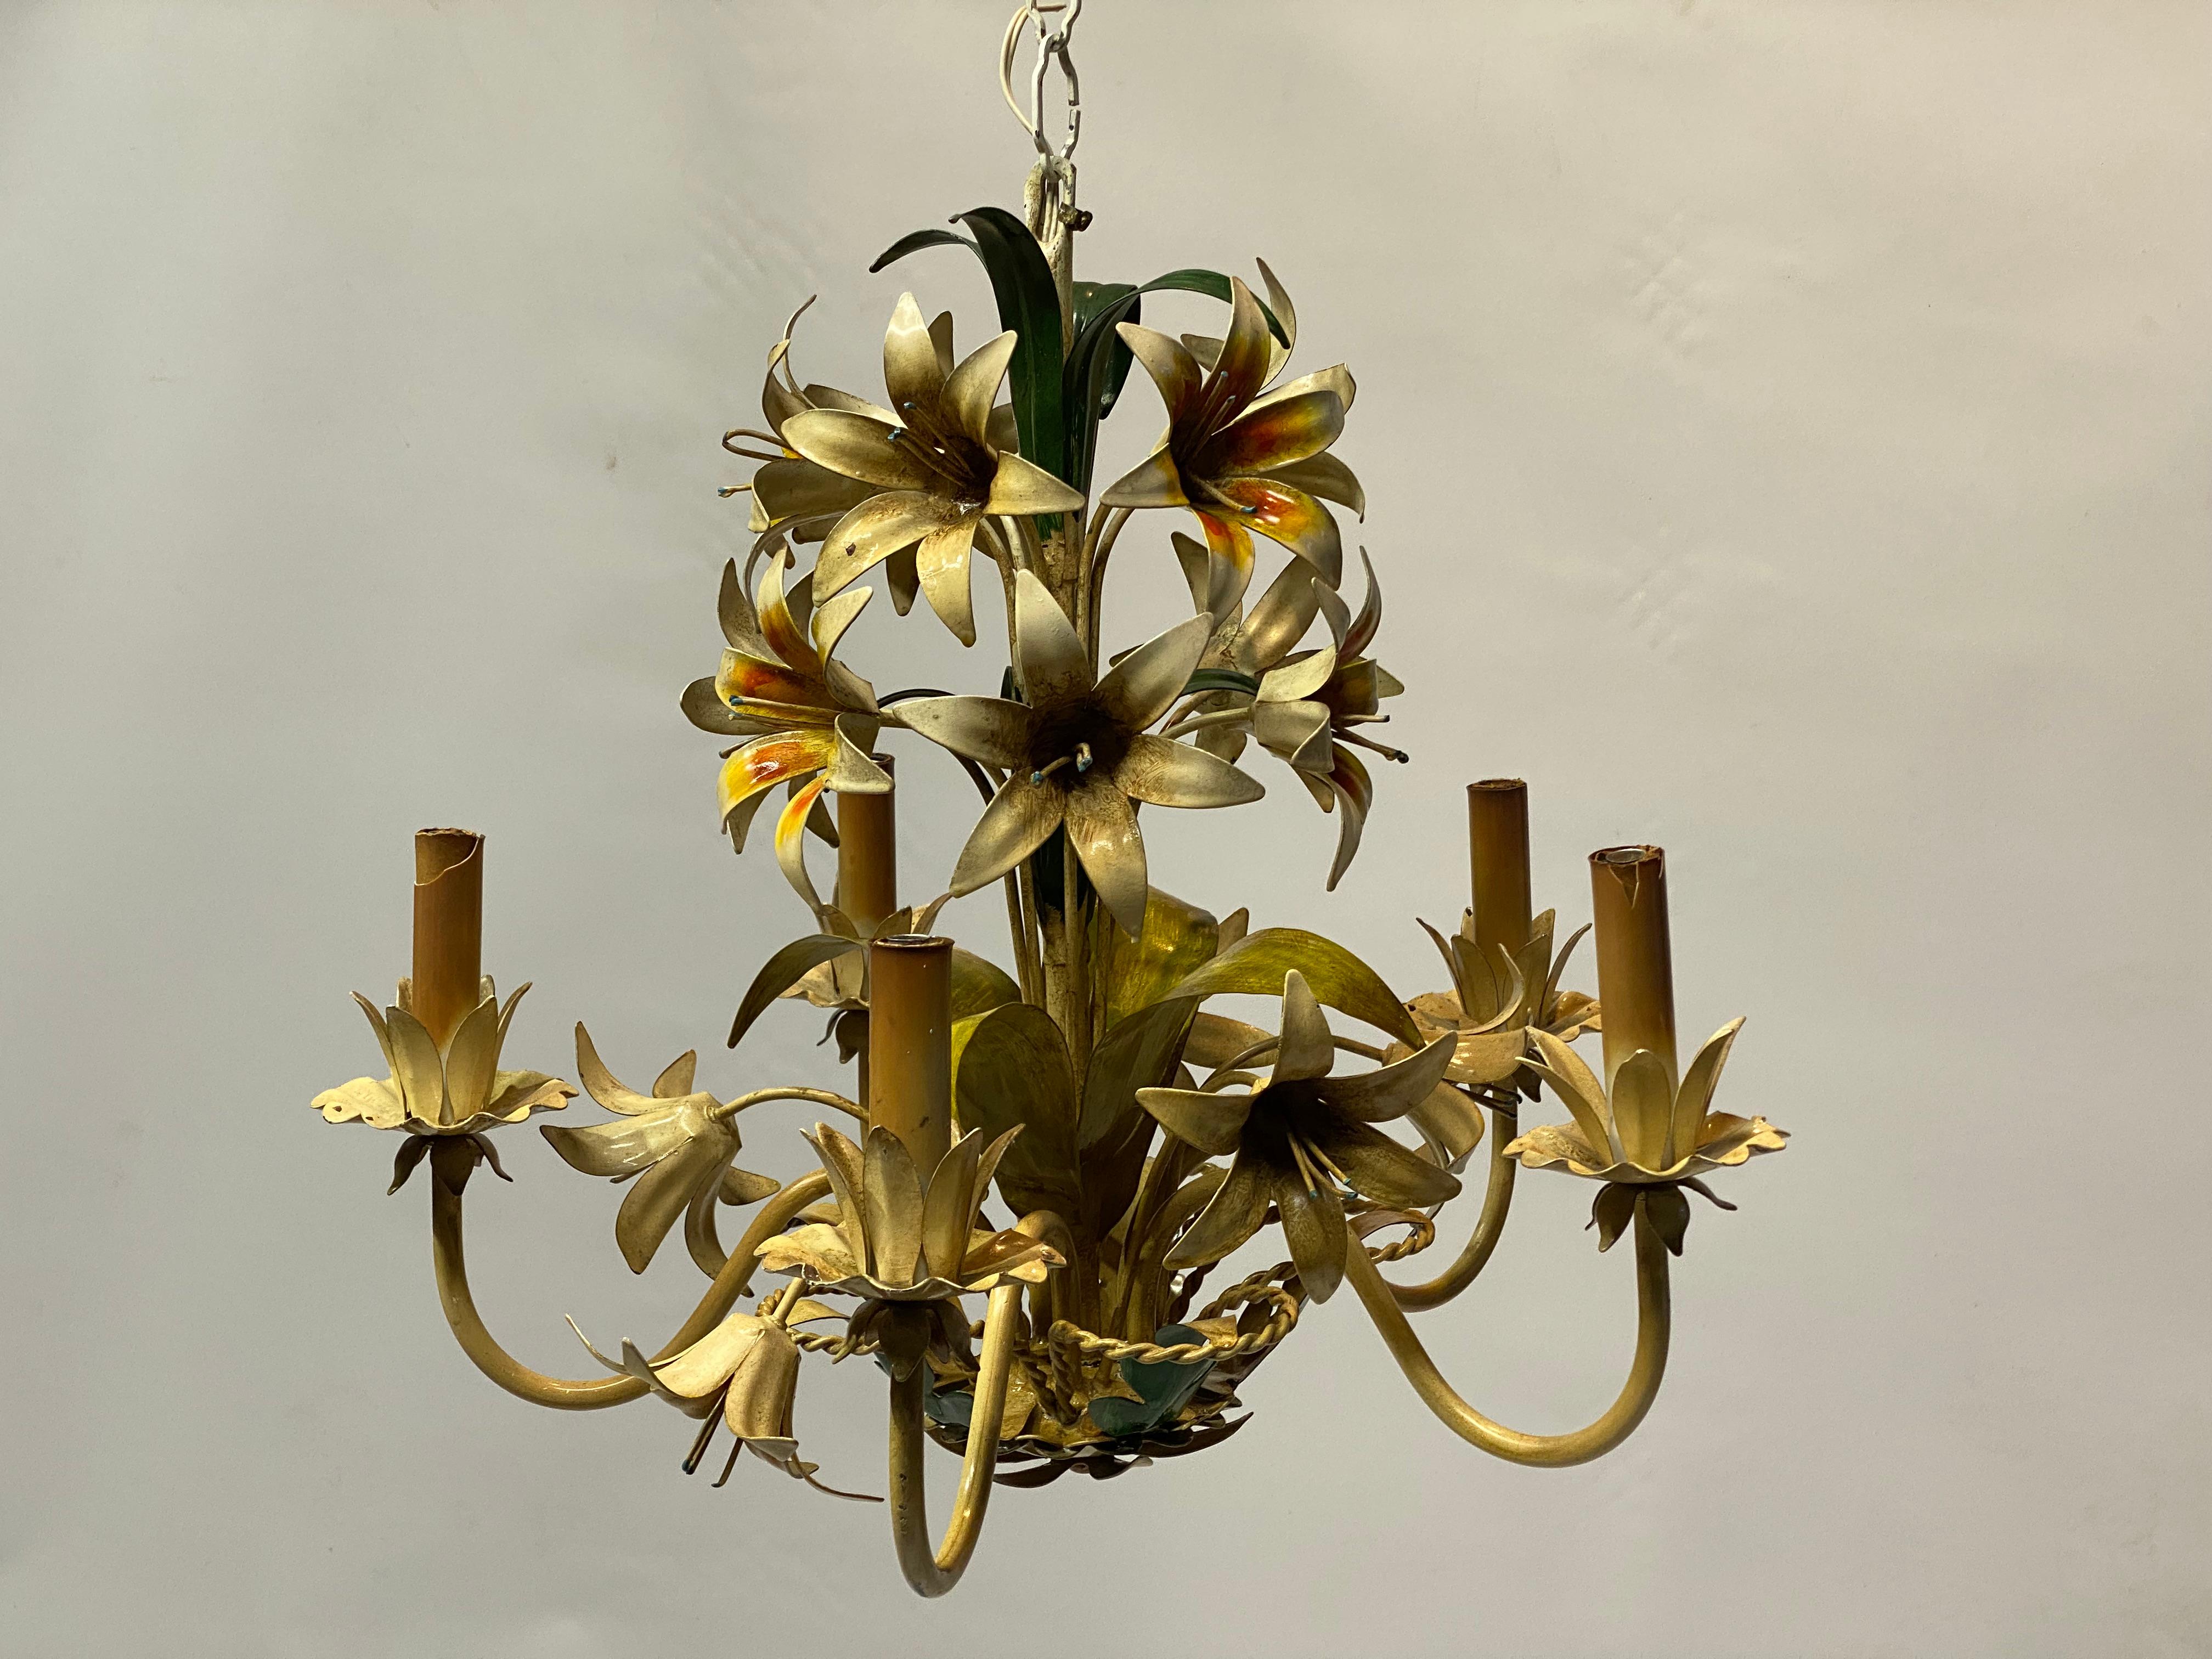 Nothing beats the pure fun decorative quality of these realistically painted floral tole lighting fixtures from Italy. Circa 1960-70. Five light chandelier. Each light can handle a 10-20 watt bulb. 

Good overall condition with some minor enamel